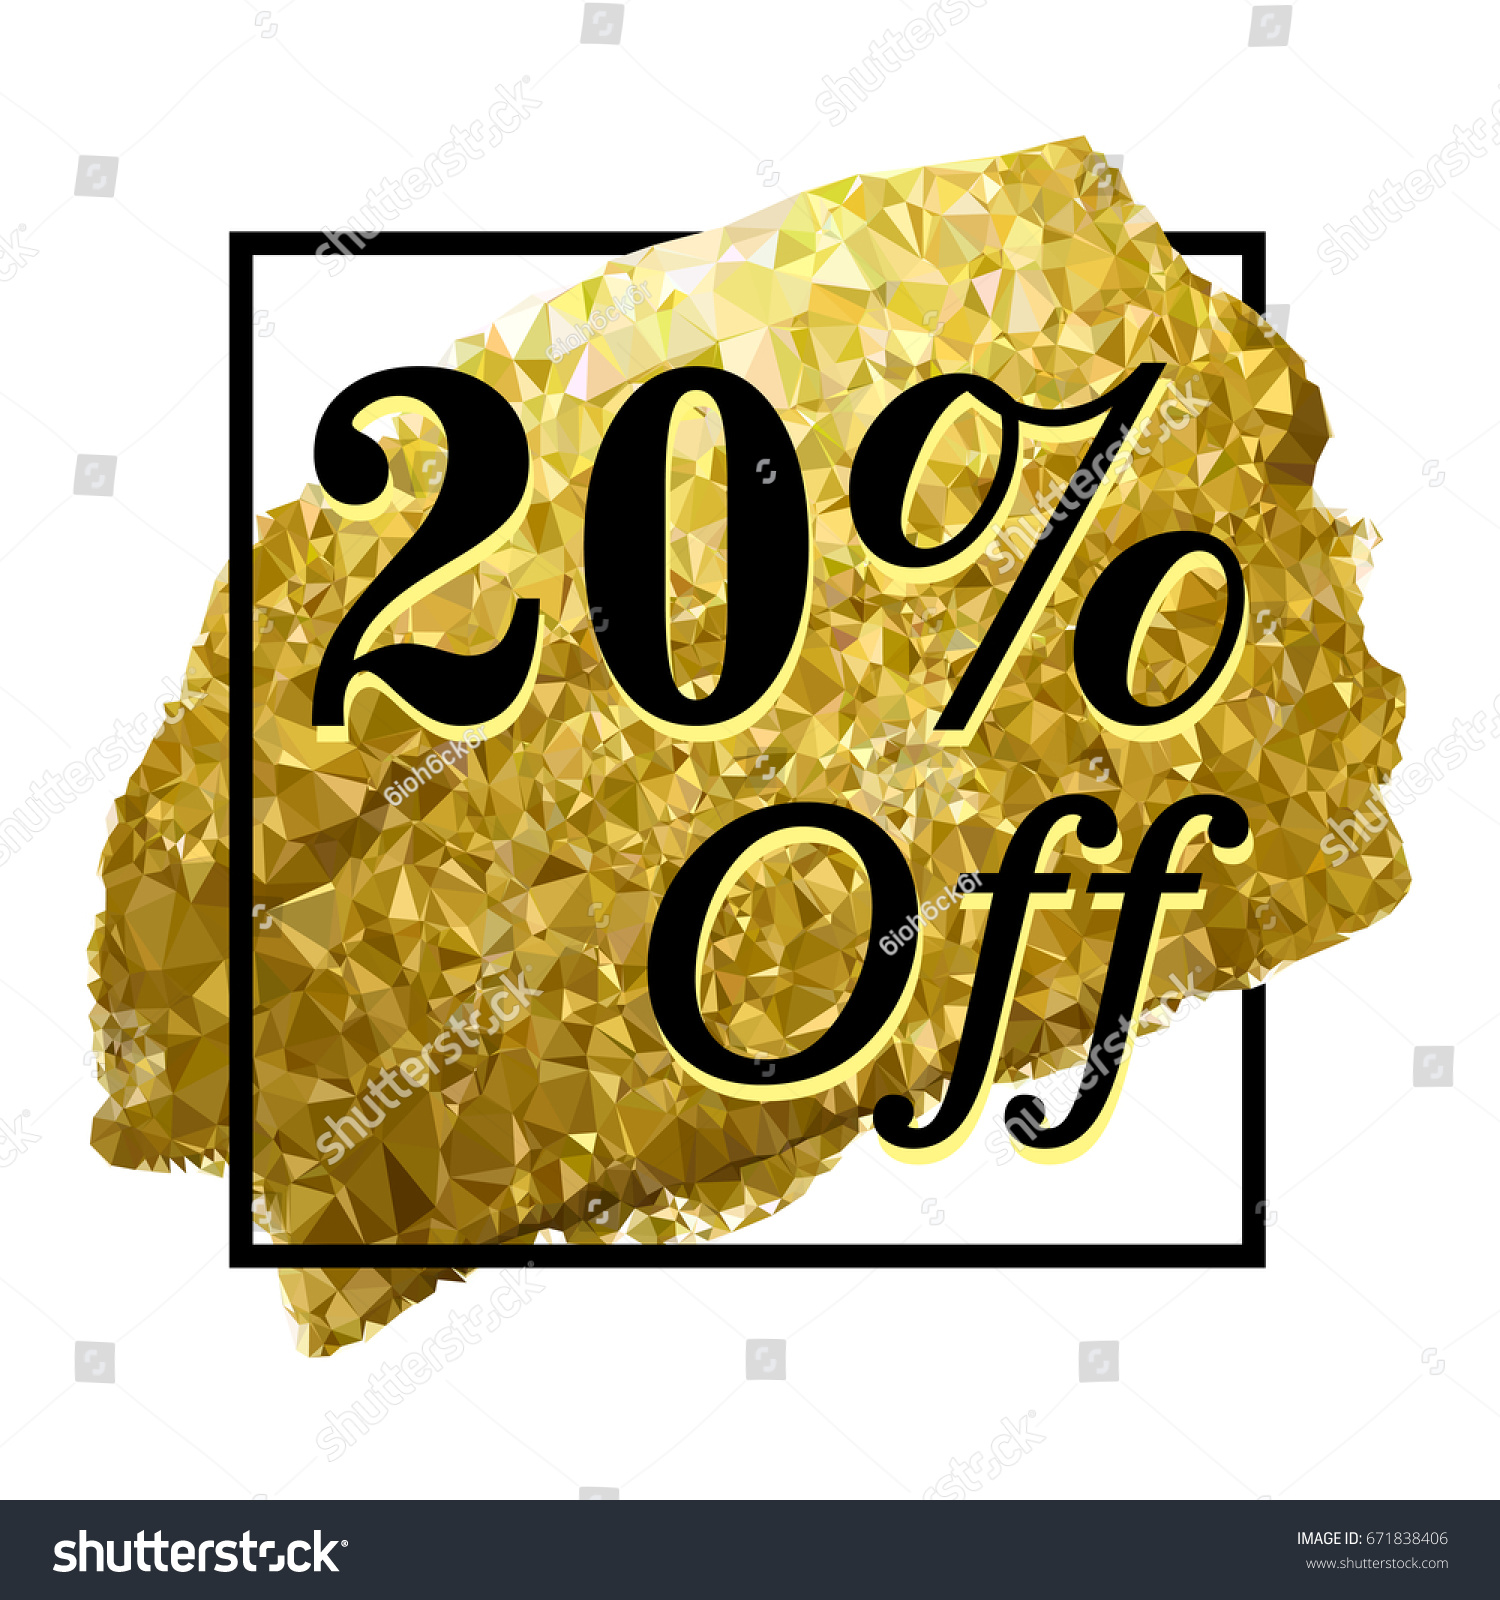 20 Off Sign Over Art Brush Stock Vector HD (Royalty Free) 671838406 ...